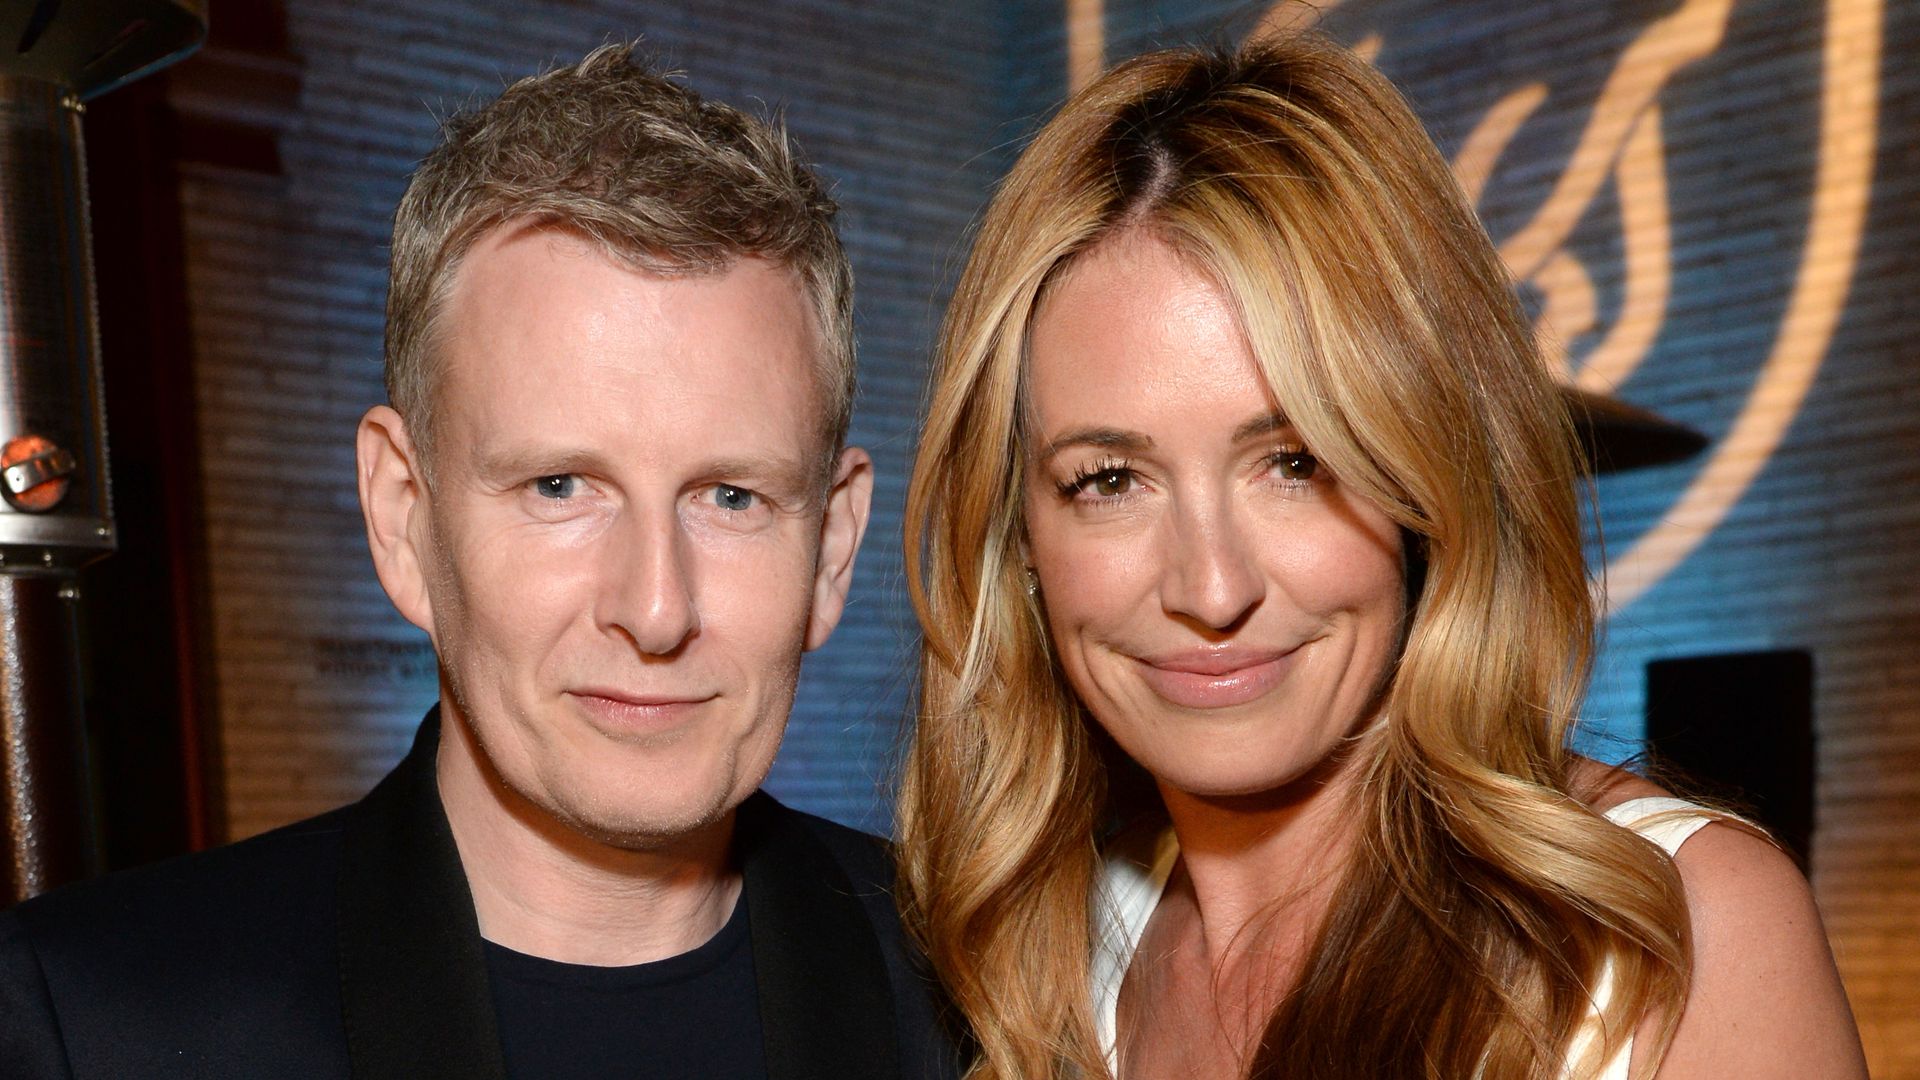 10 rare photos of Cat Deeley's sons with comedian husband Patrick Kielty